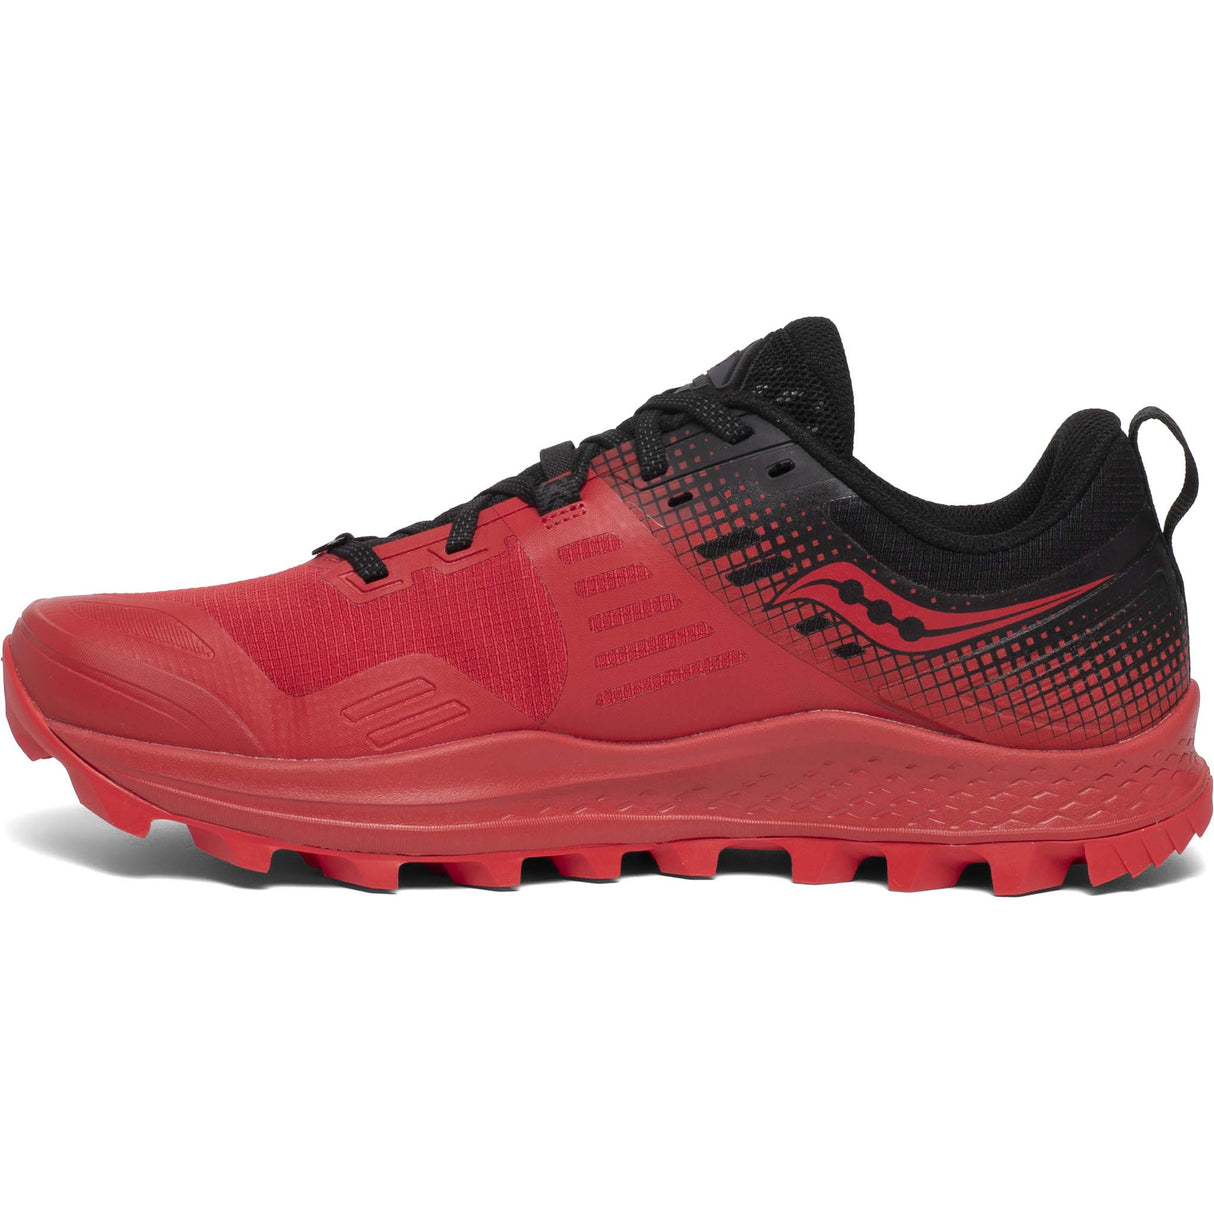 Saucony Peregrine 10 ST rouge noir homme lateral